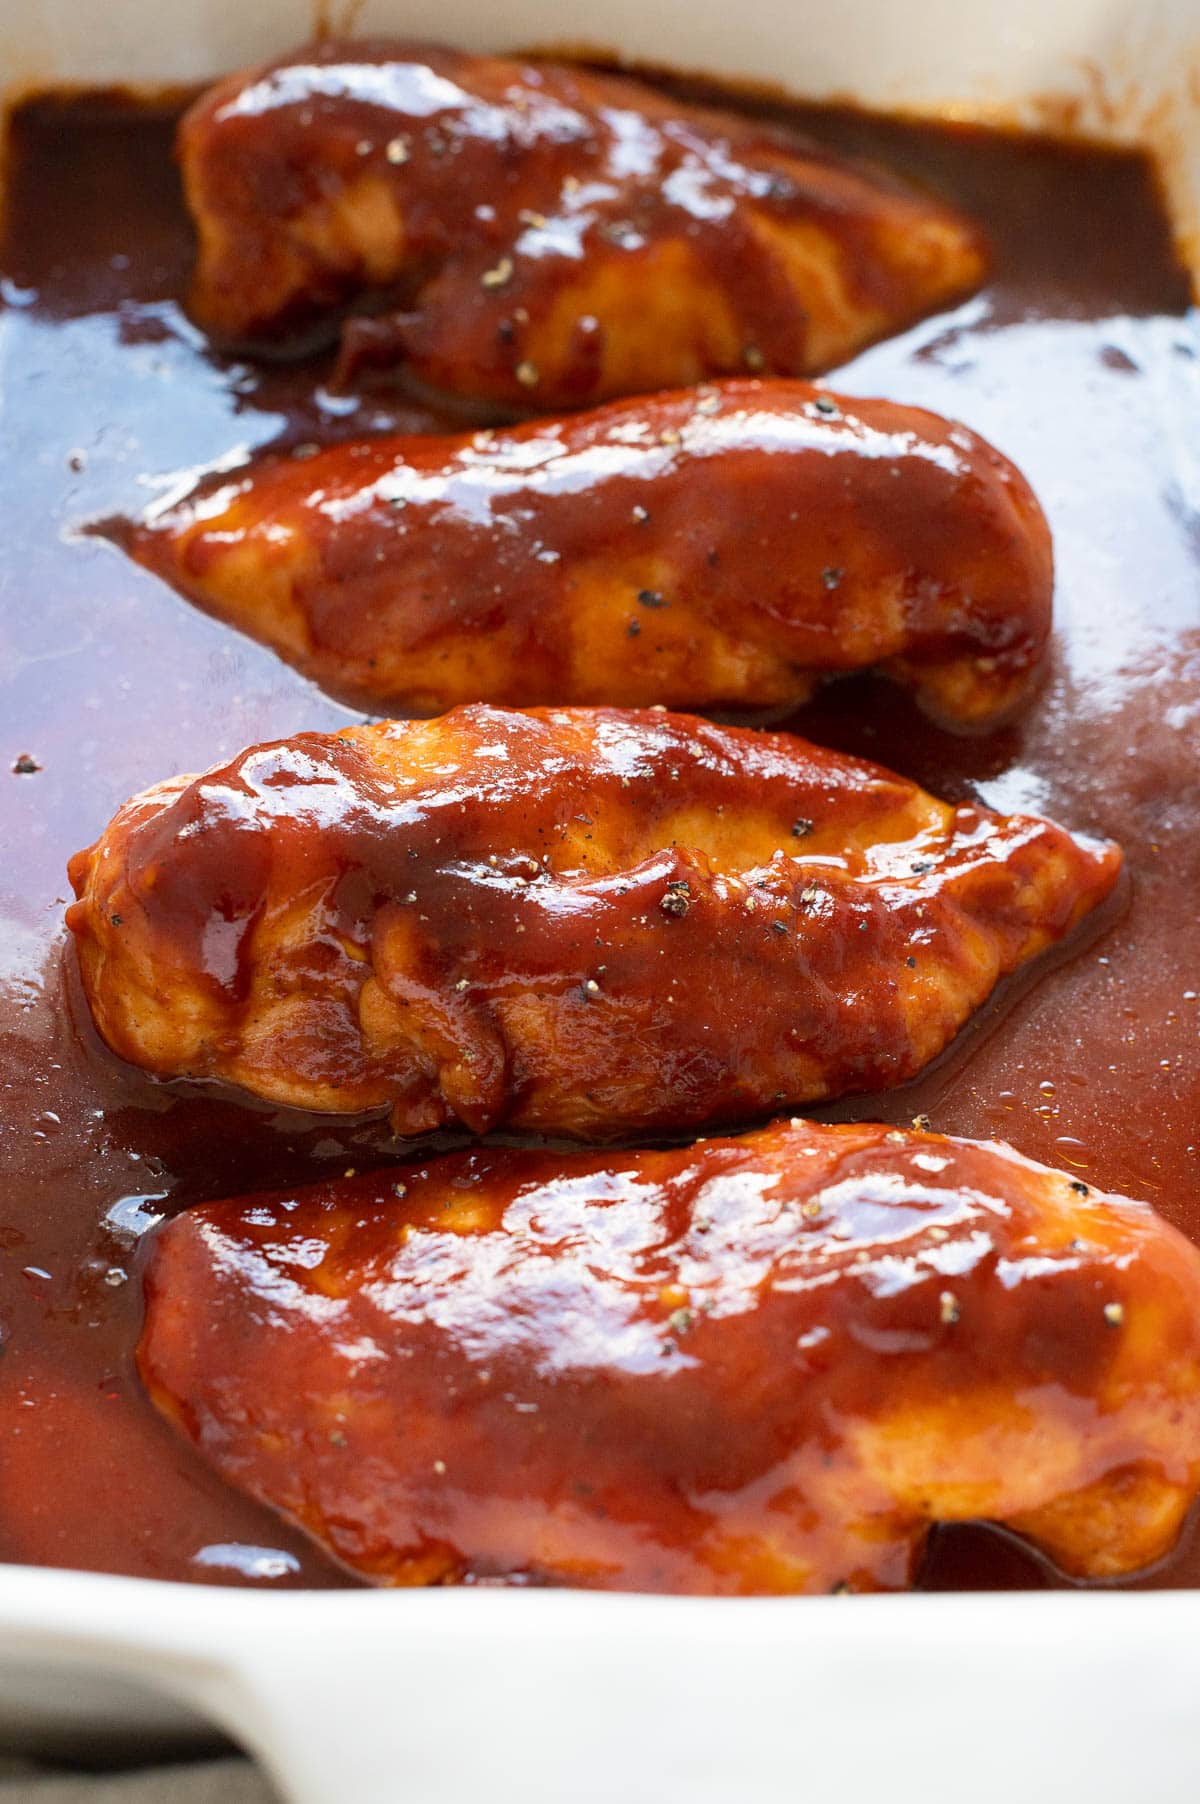 Baked BBQ chicken coated in barbecue sauce.